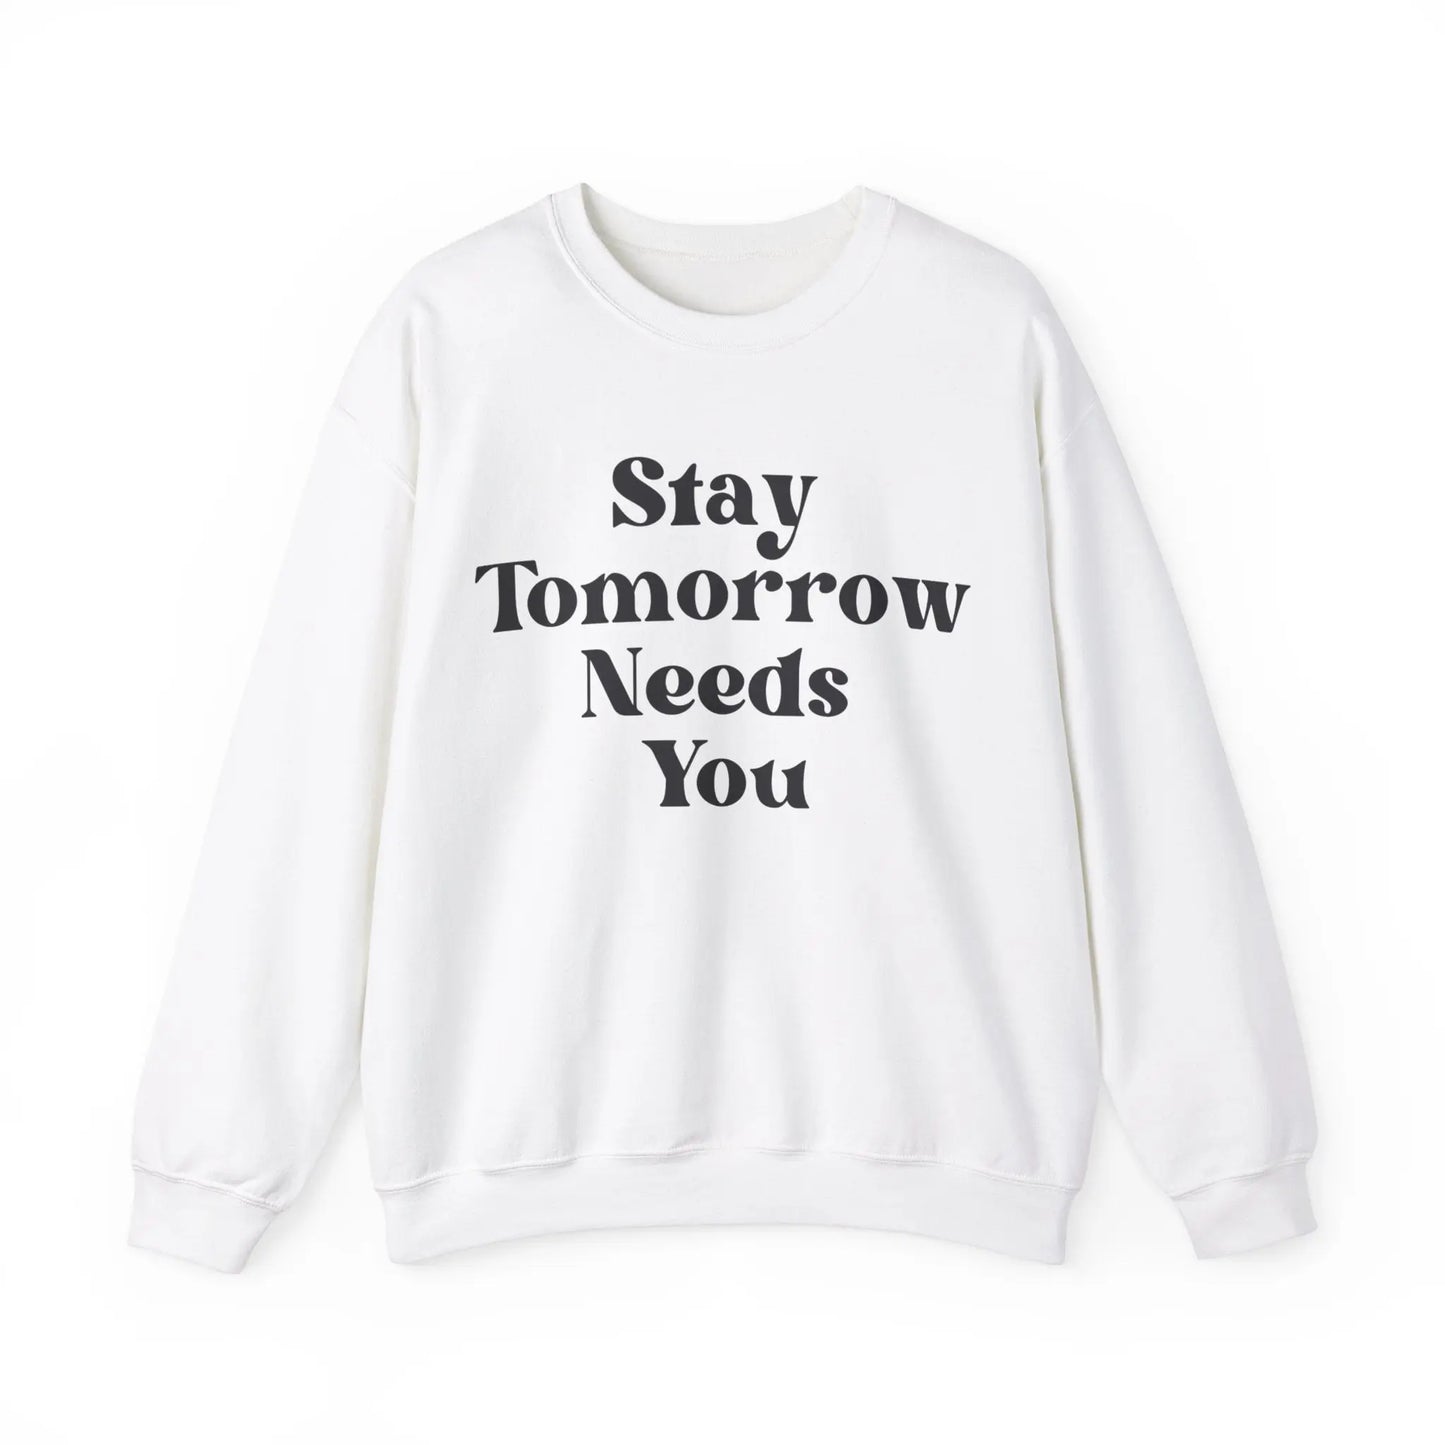 Retro Hippie Boho Stay Tomorrow Needs You Mental Health Awareness Sweatshirt Suicide Prevention Mothers Day Fathers Day Gift Veterans Support Military Gift - Stay Tomorrow Needs You Retro Hippie Boho Stay Tomorrow Needs You Mental Health Awareness Sweatshirt Suicide Prevention Mothers Day Fathers Day Gift Veterans Support Military Gift